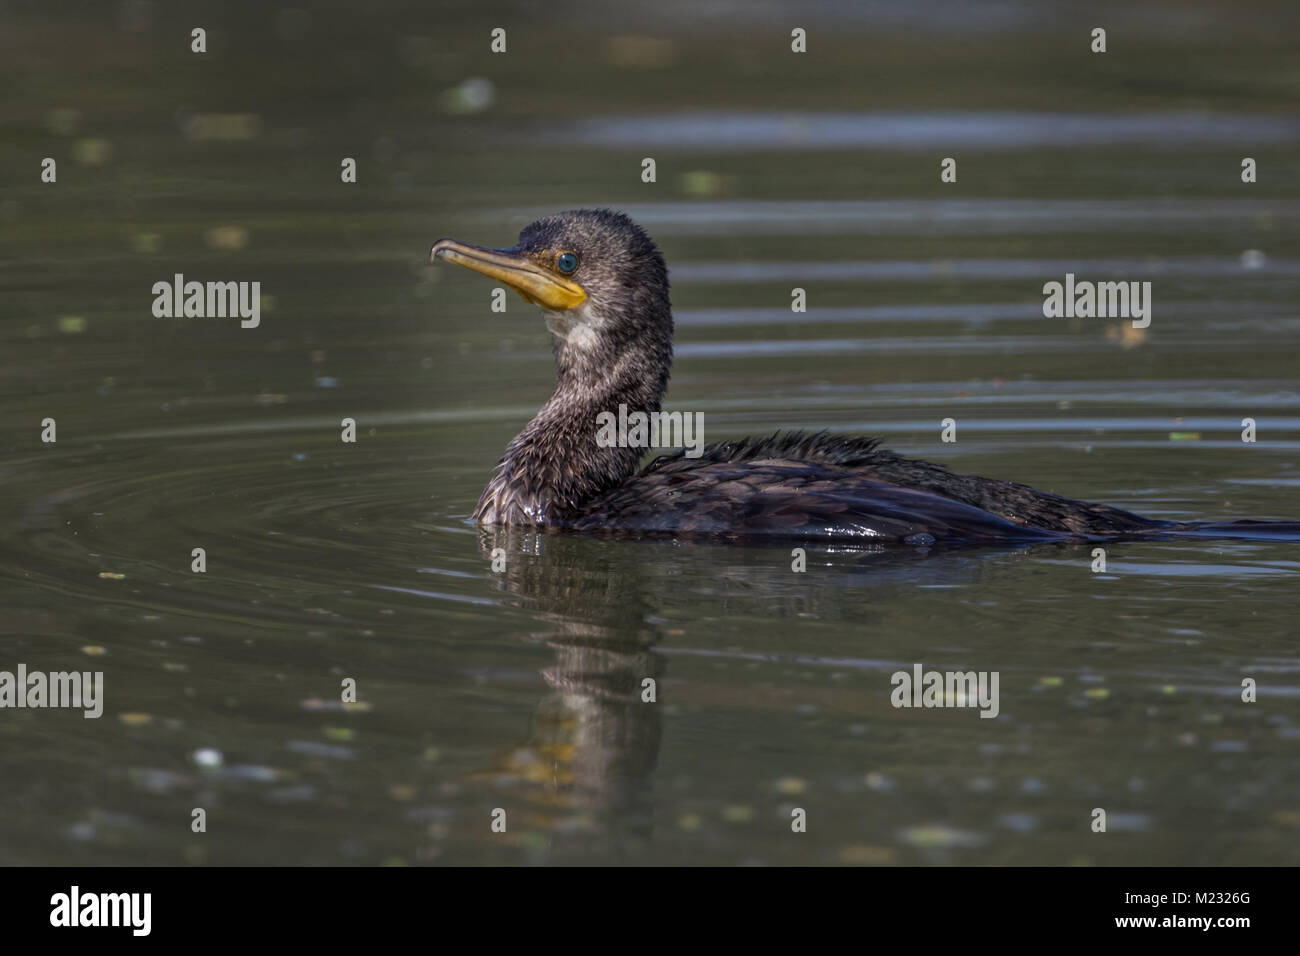 The great cormorant (Phalacrocorax carbo) landing in water at Bharatpur Bird Sanctuary in Rajasthan, India. Stock Photo